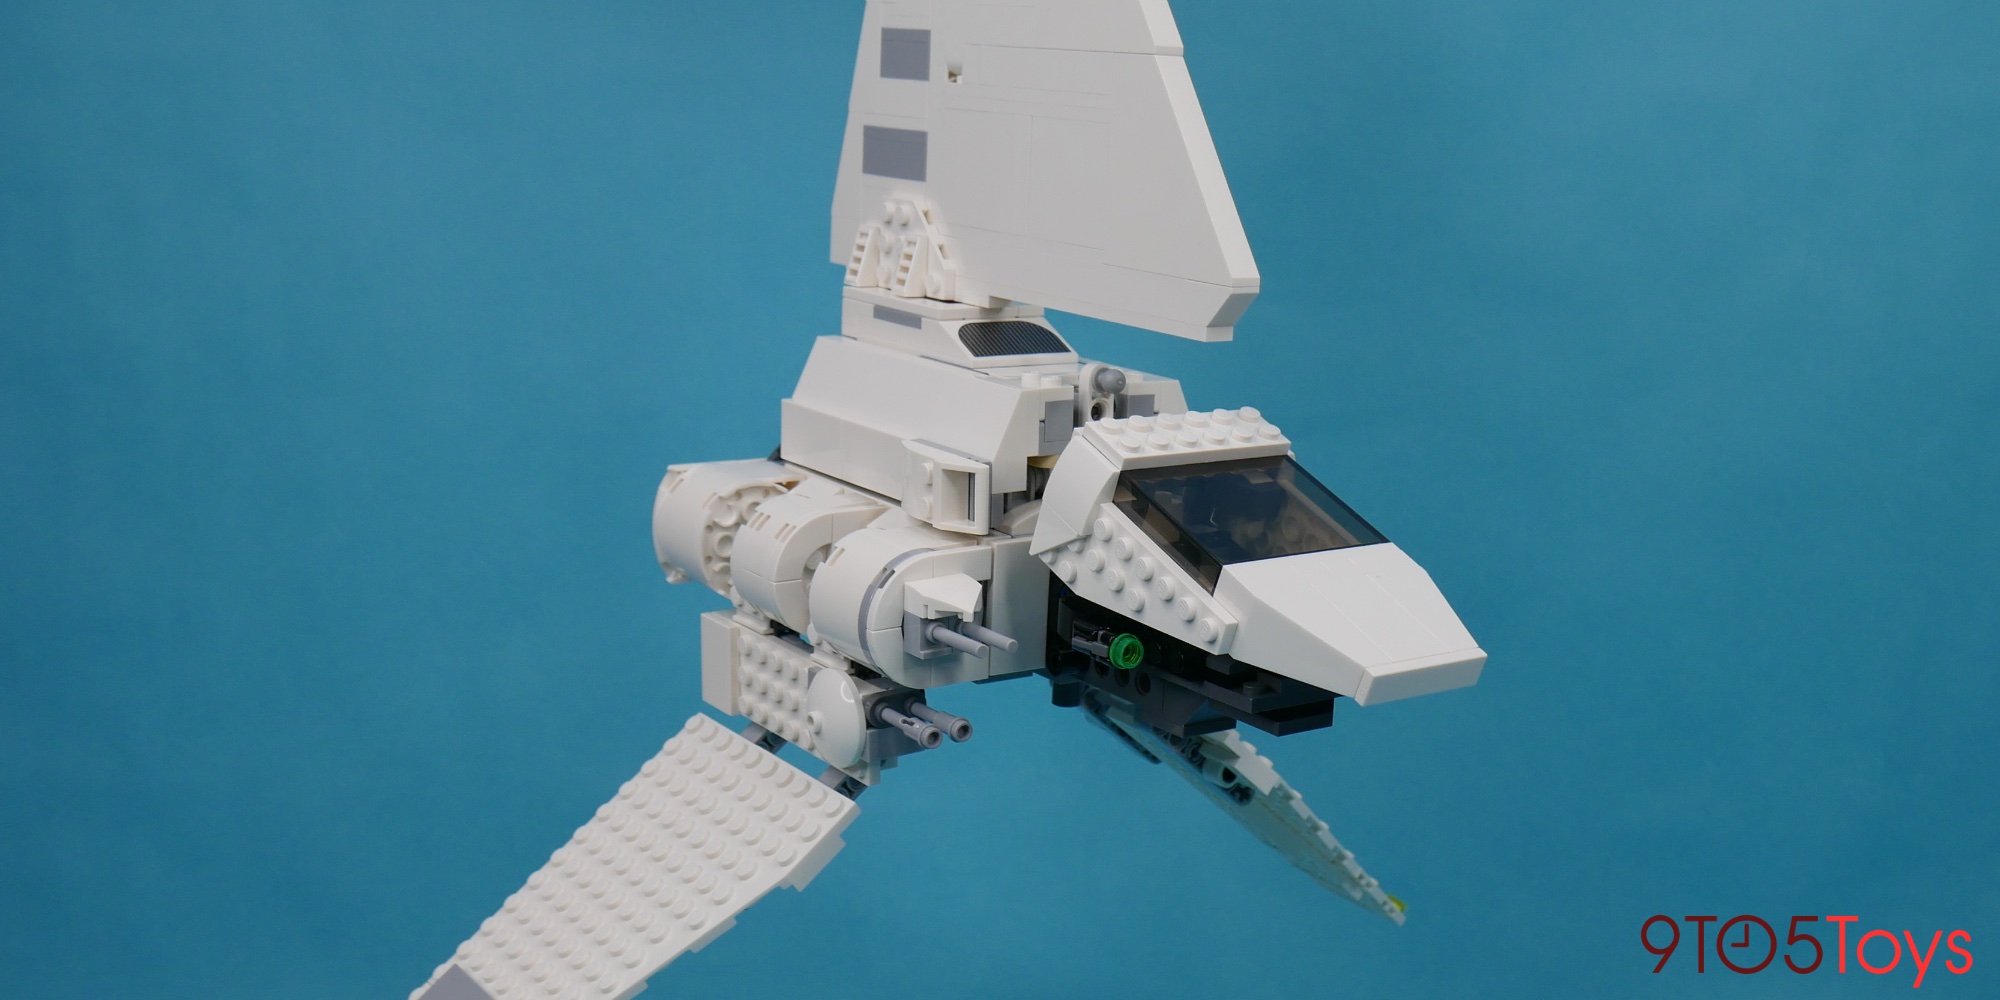 Imperial Shuttle: Hands-on the new 660-piece build 9to5Toys